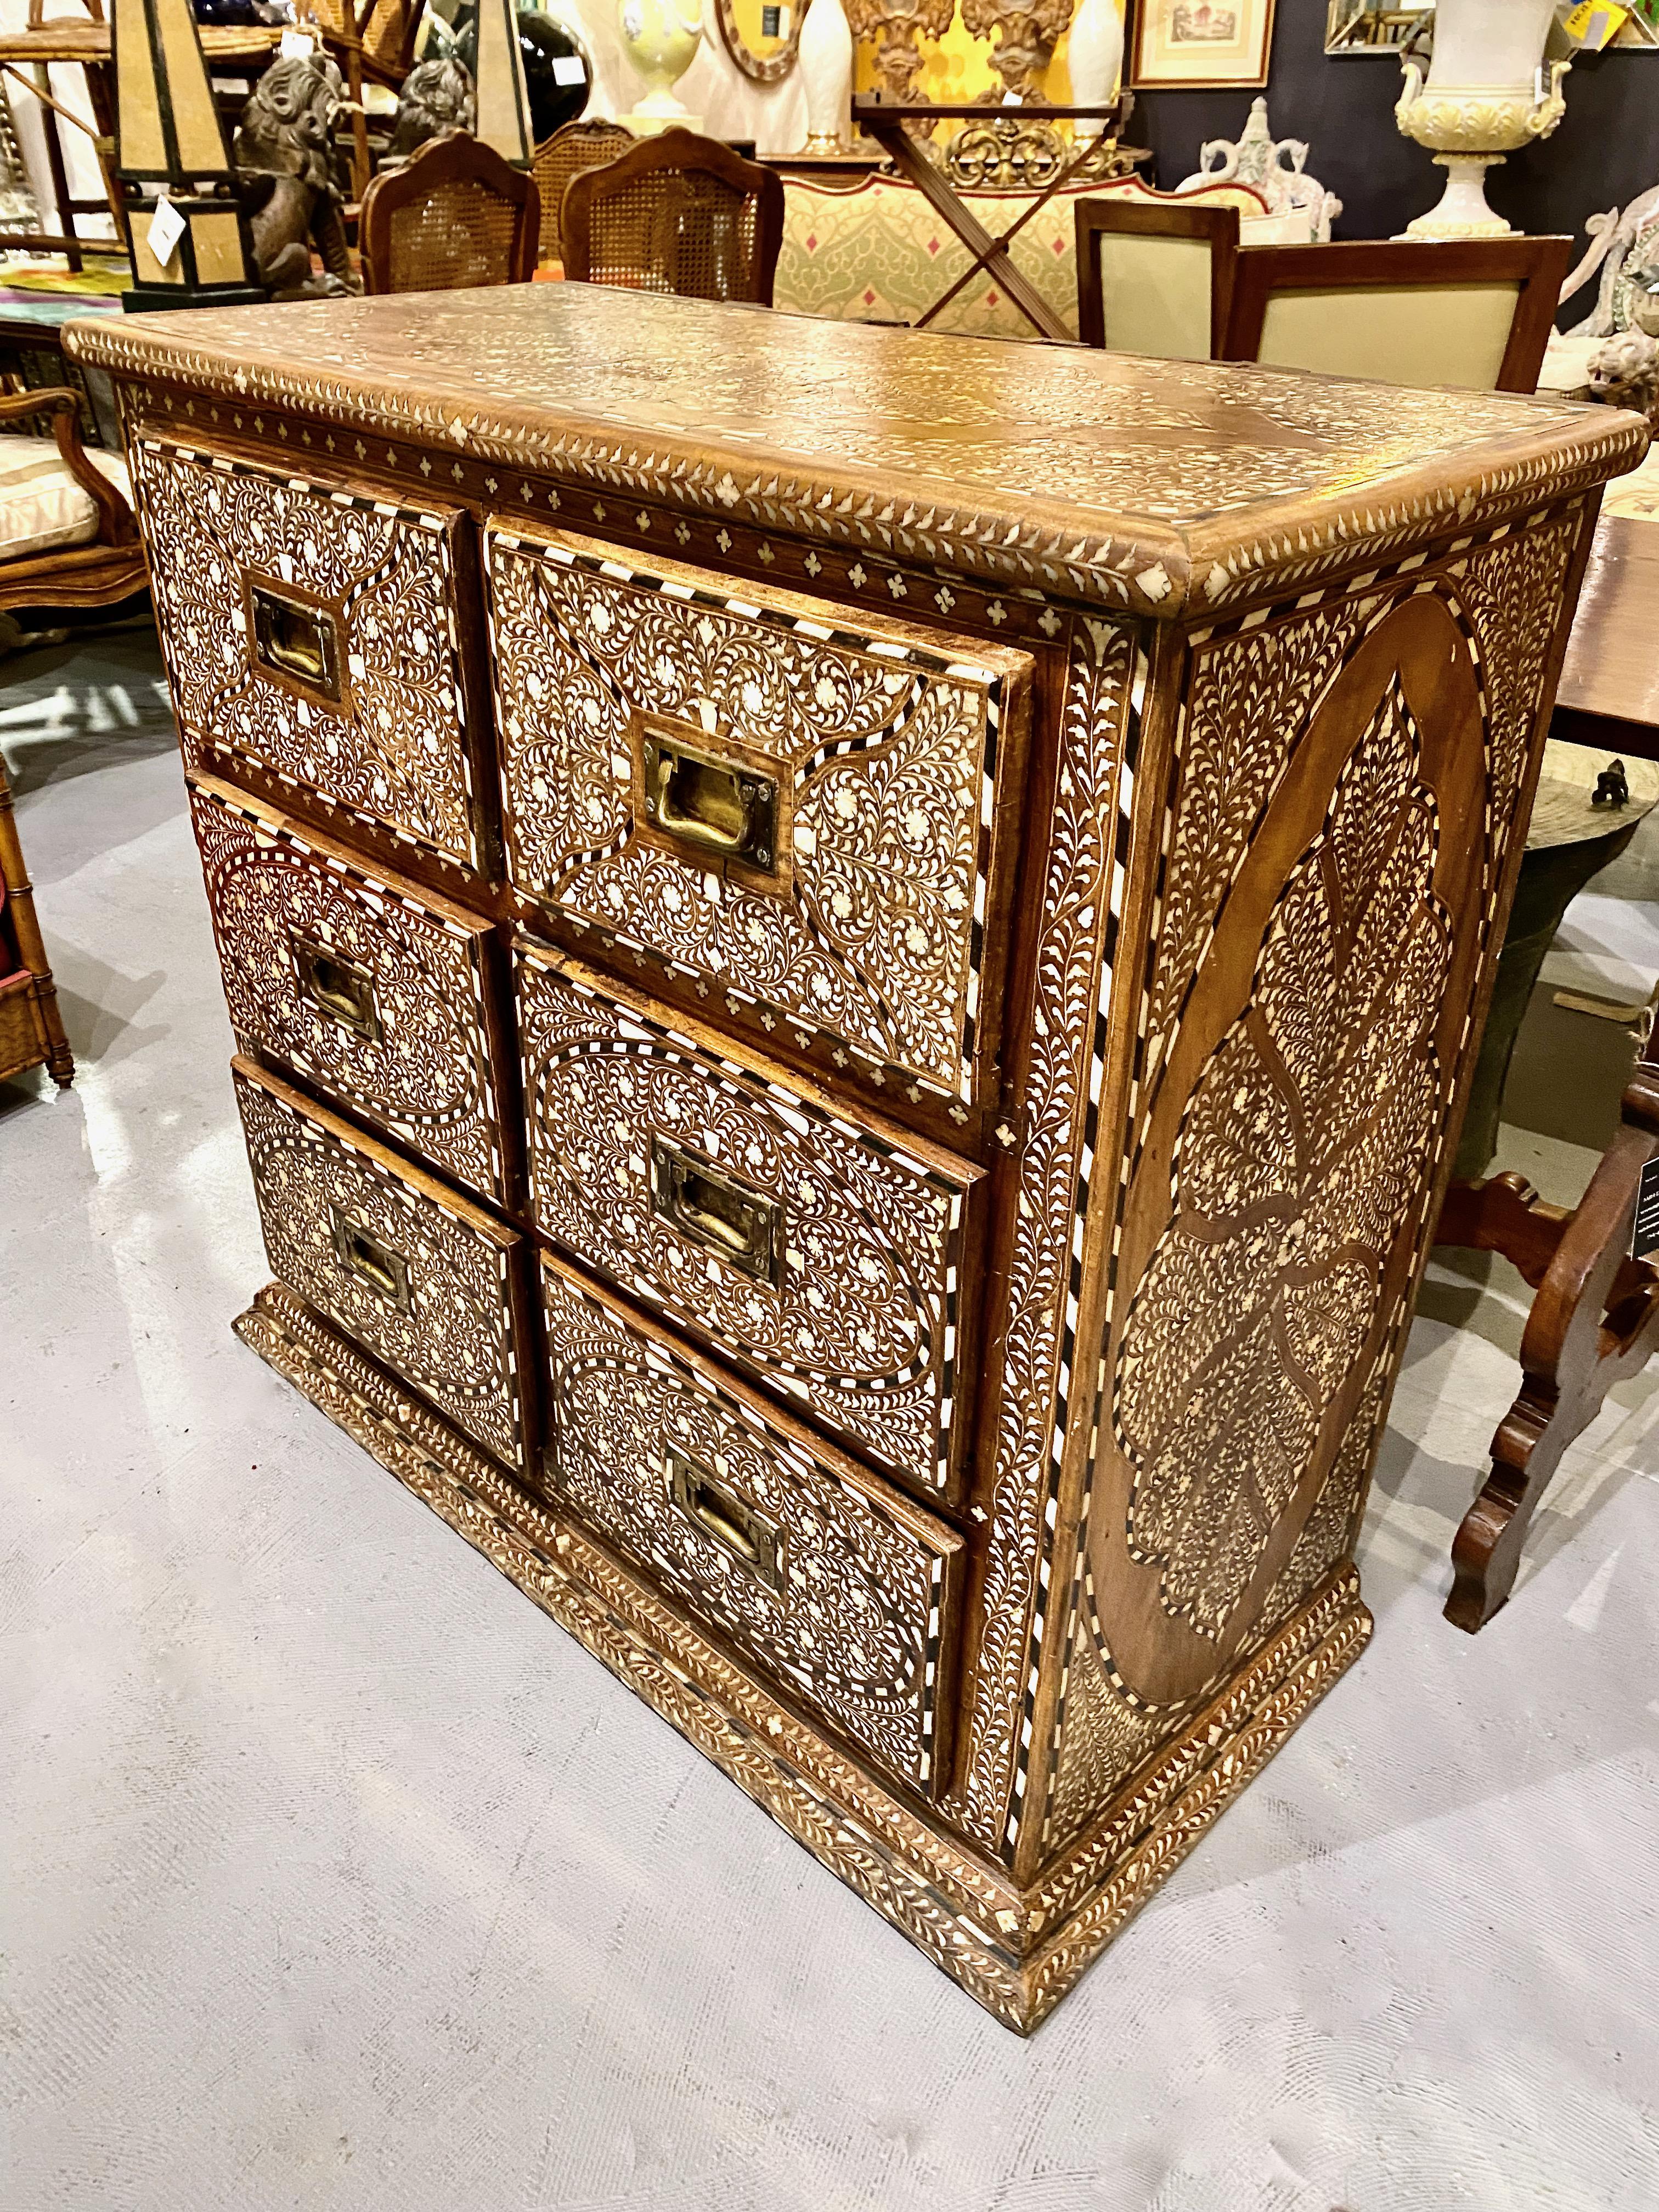 This is a superb example of a Levantine Chest of Drawers. All exposed surfaces of the chest are finely detailed in inlaid bone, ebony and shell. The inlay takes the form of abstract flora in traditional Muslim patterns. All elements of the inlay